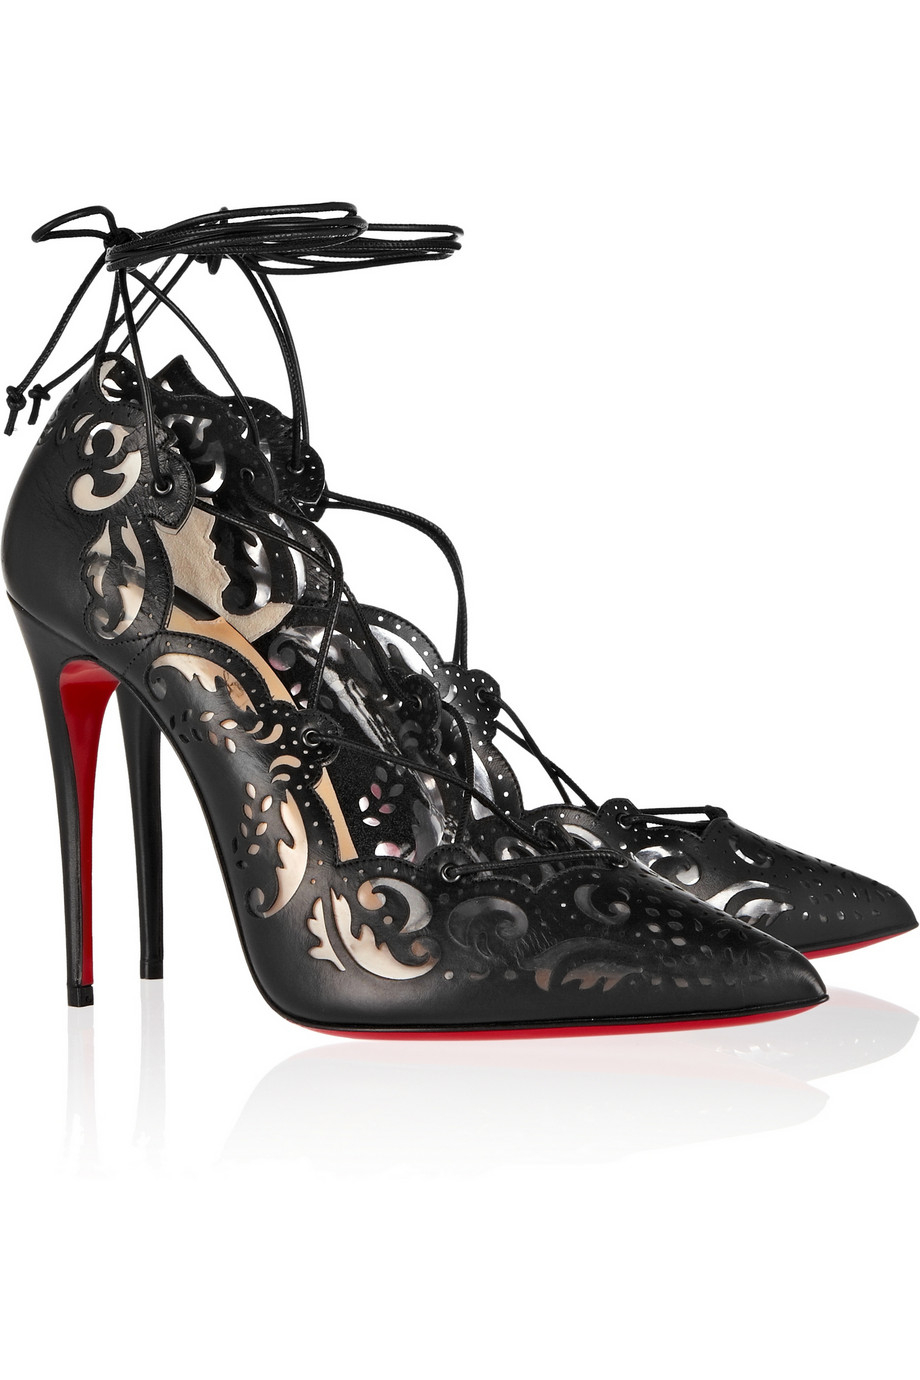 Christian Louboutin Impera Leather and Pvc Pumps in Black - Lyst